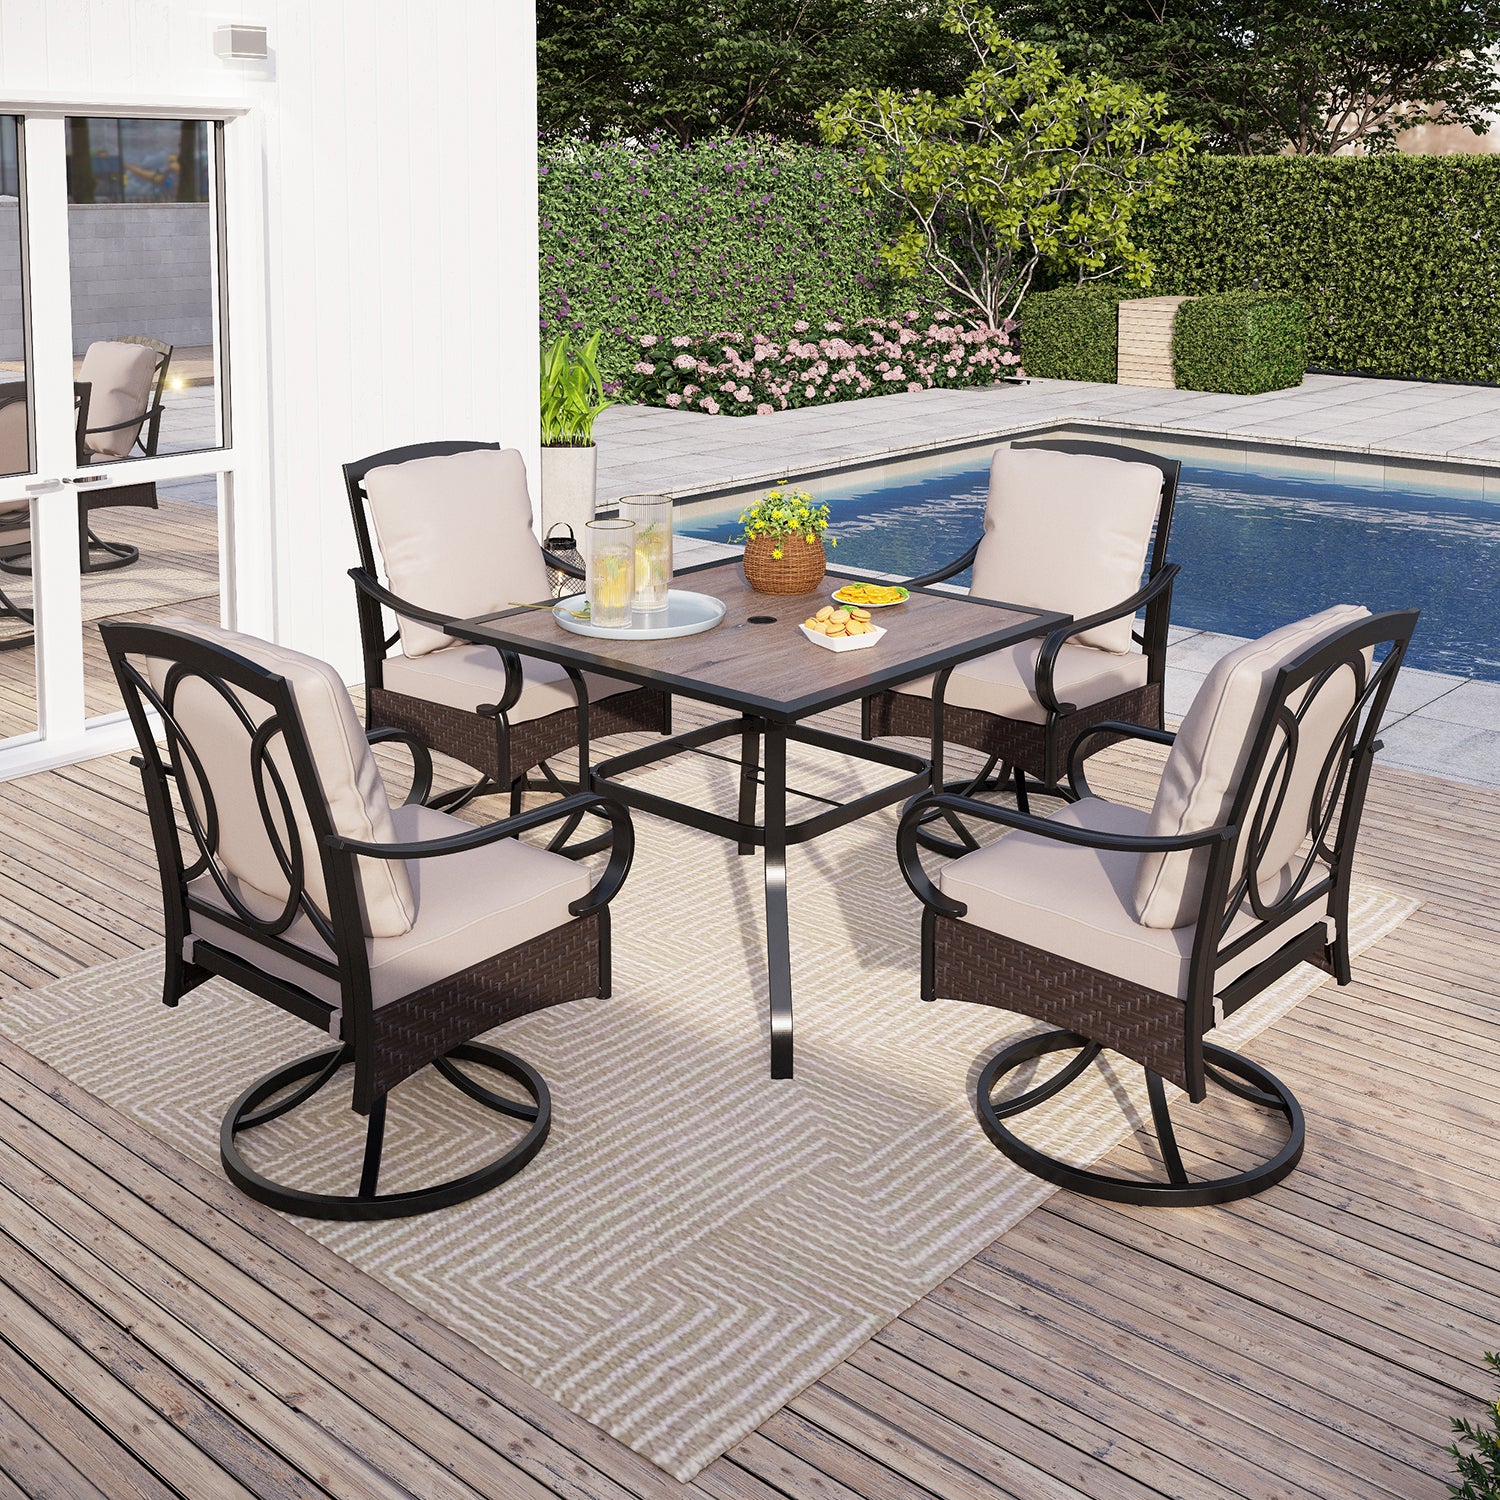 square table outdoor dining set with 4 swivel chairs